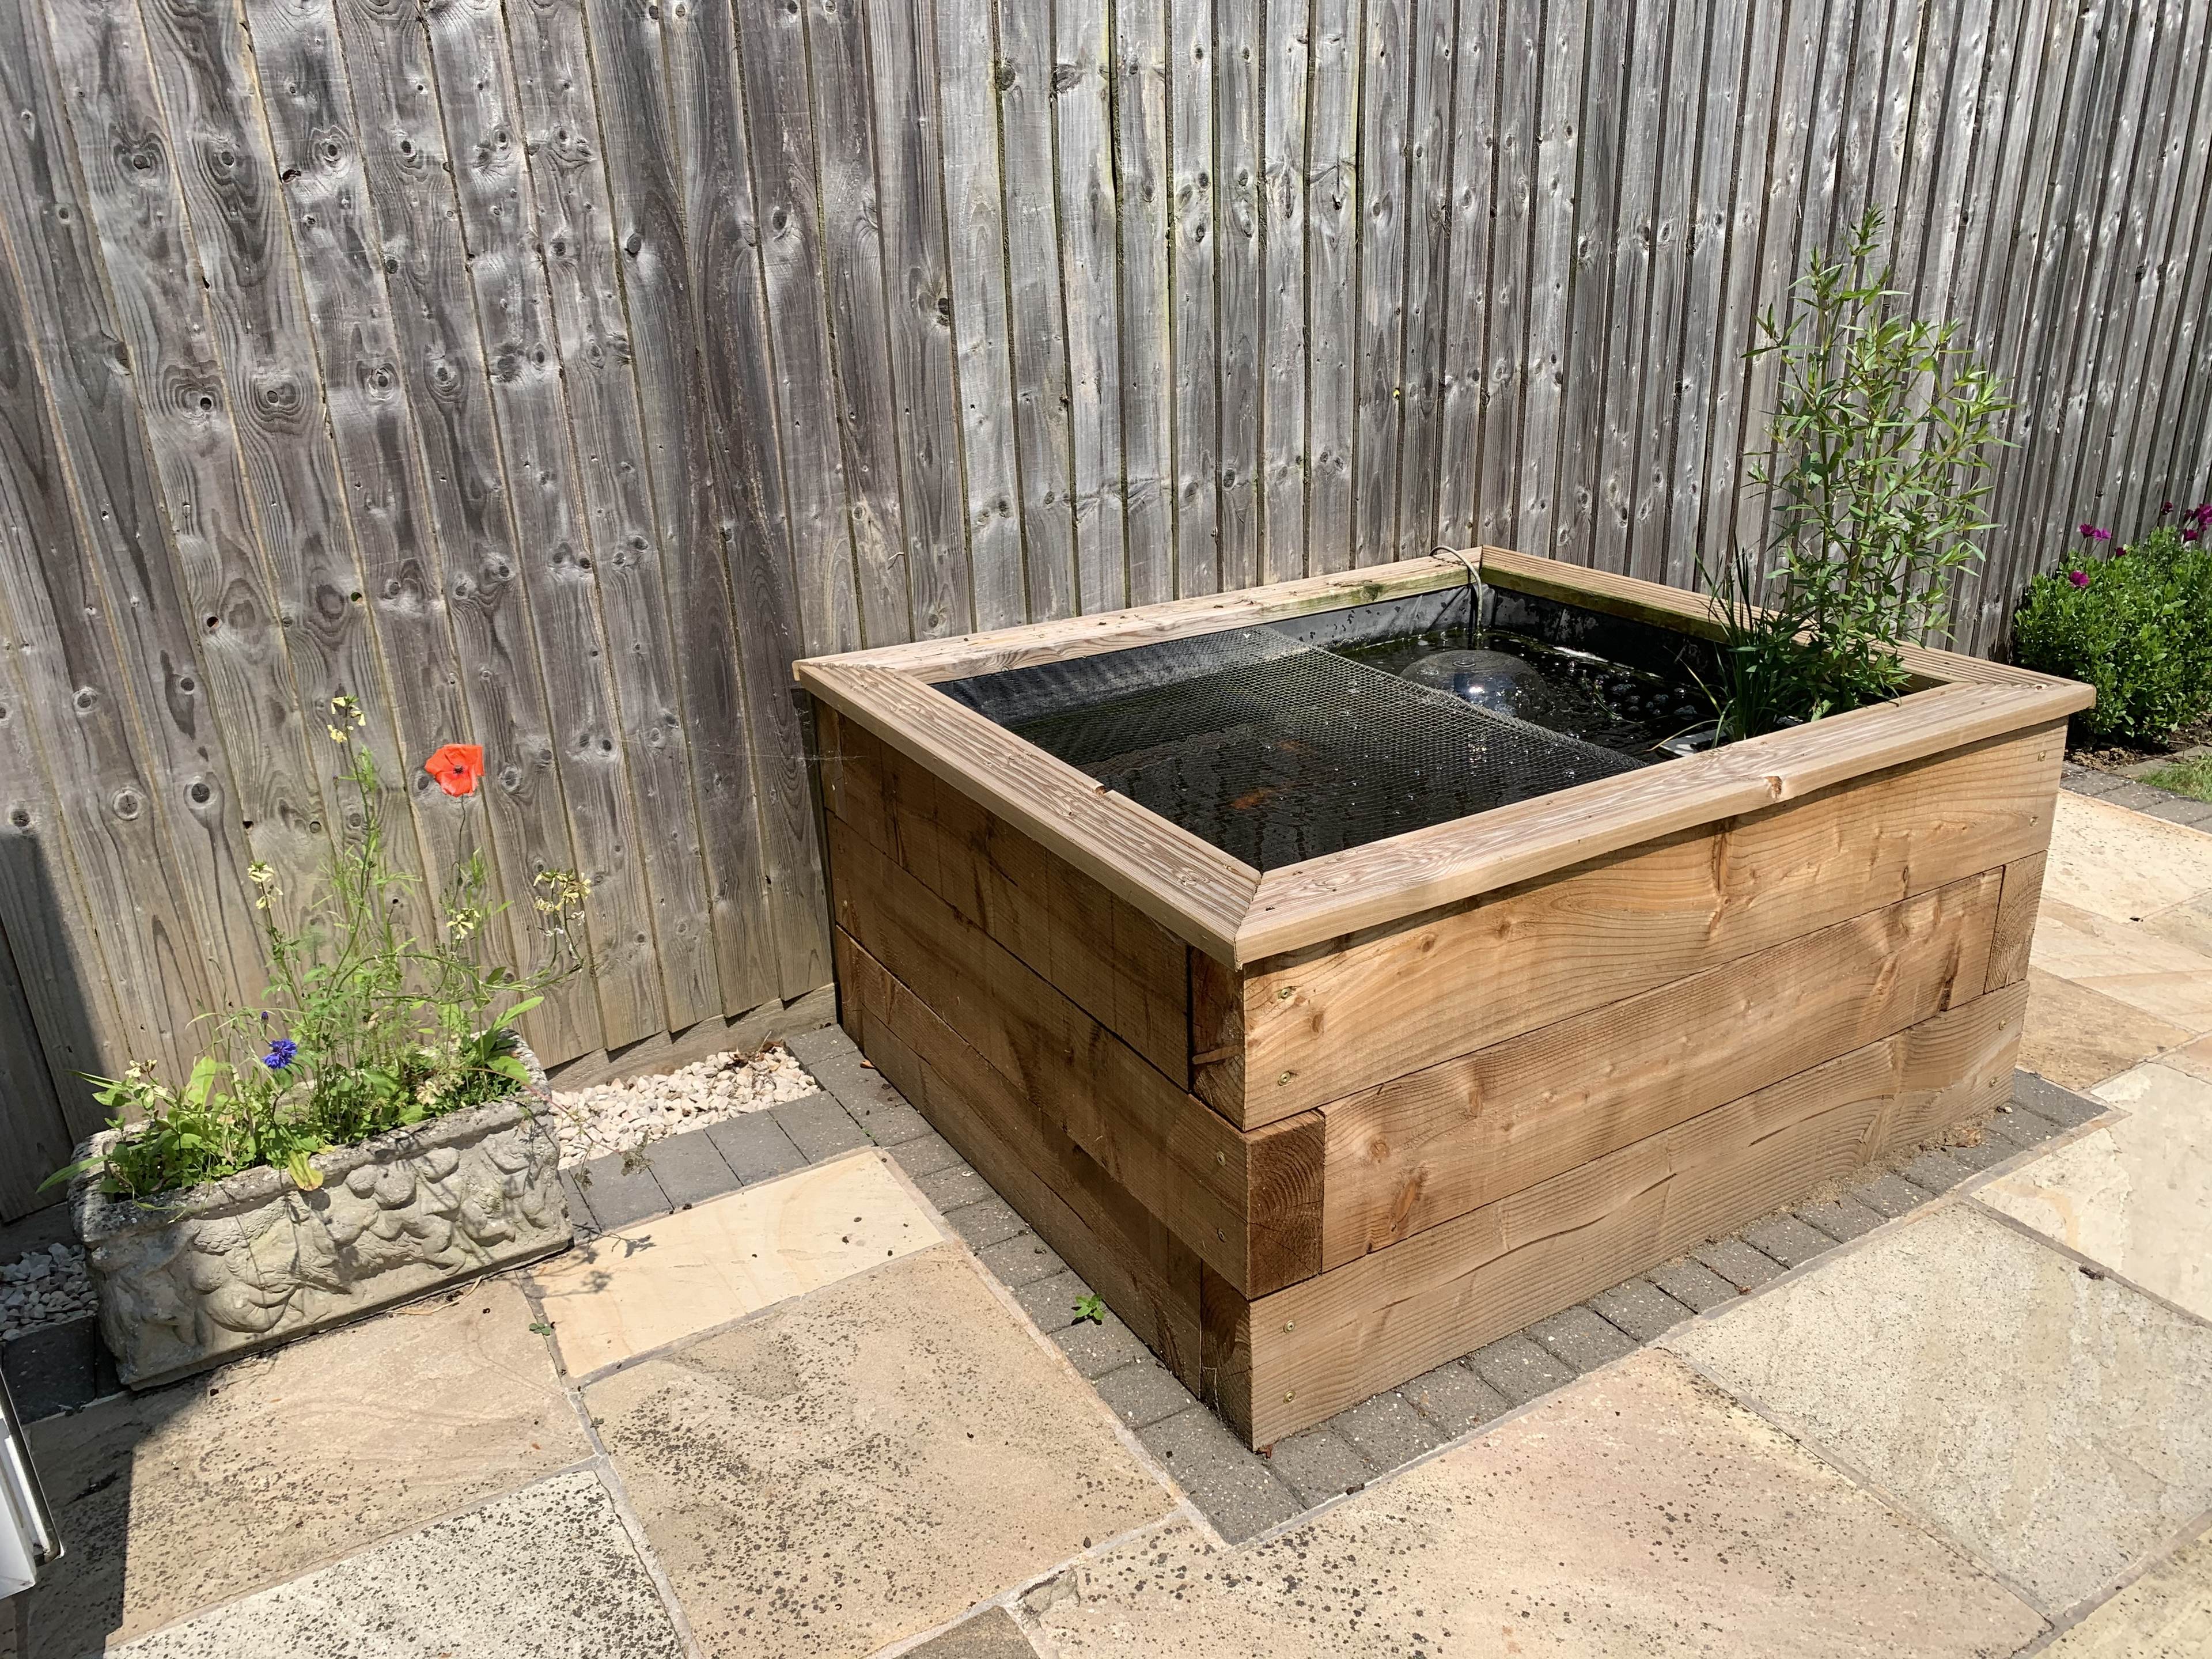 Show your Ponds - Page 8 - Homes, Gardens and DIY - PistonHeads